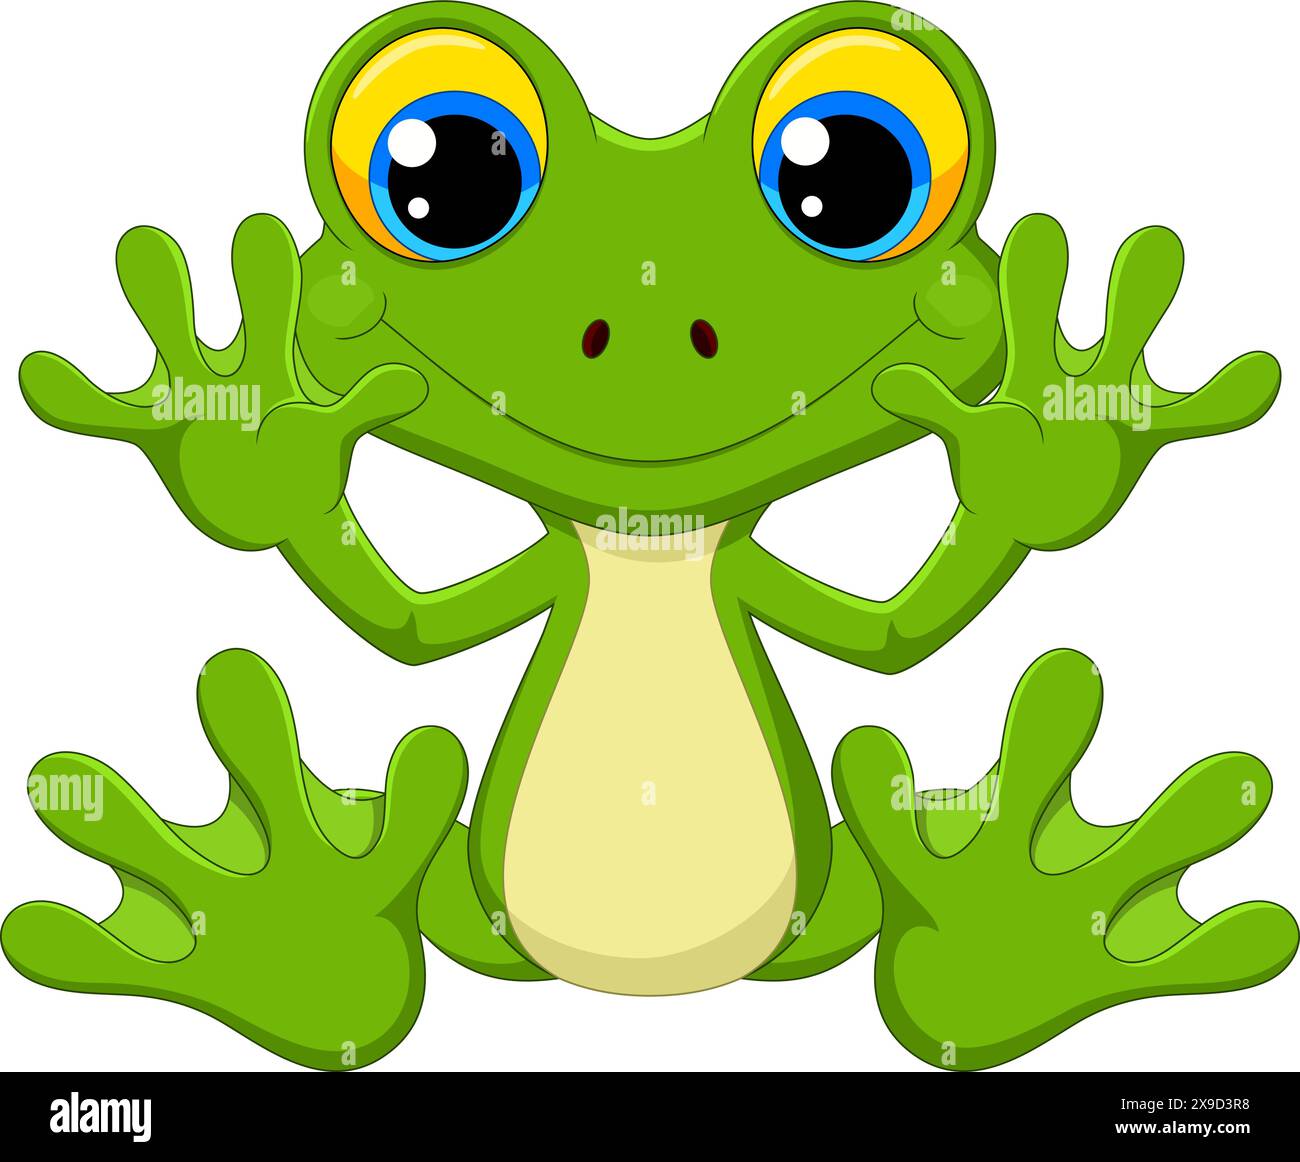 Cute frog cartoon isolated on white background Stock Vector